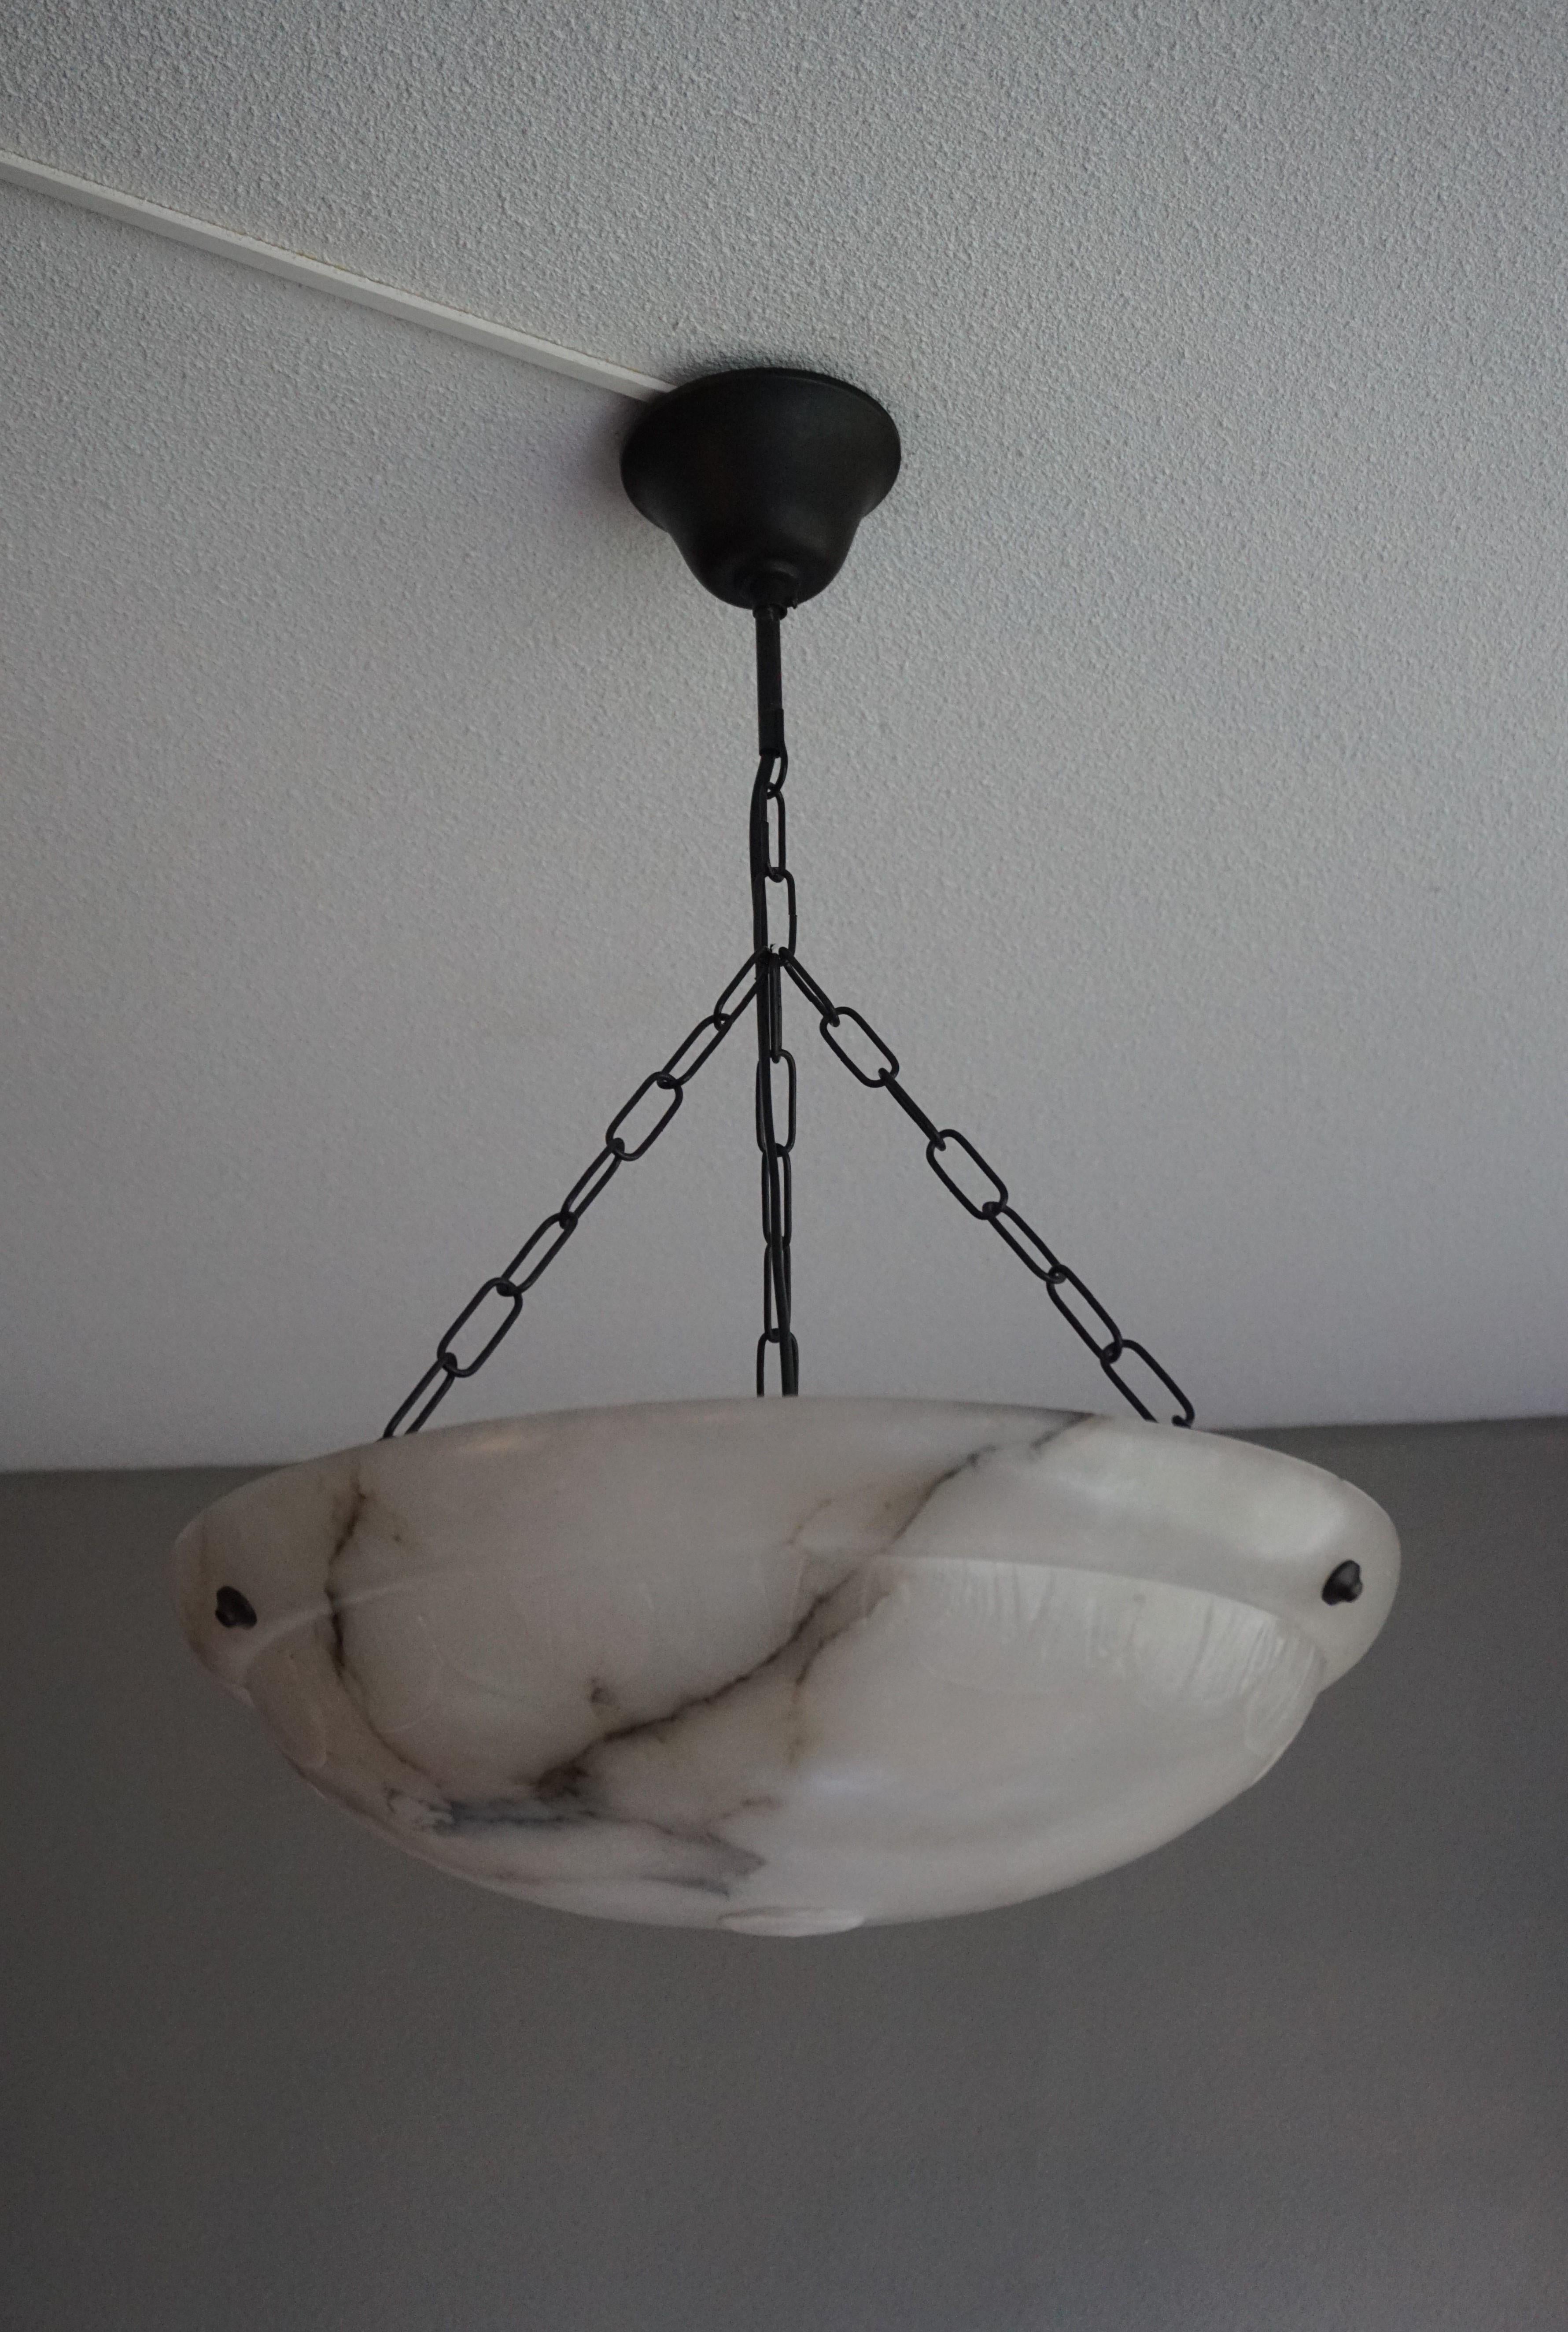 Beautiful design and excellent condition, early 1900s mineral stone pendant.

If you are looking for a good size and great looking Arts & Crafts era light fixture then this fine specimen with its unique pattern of black veins could be perfect for